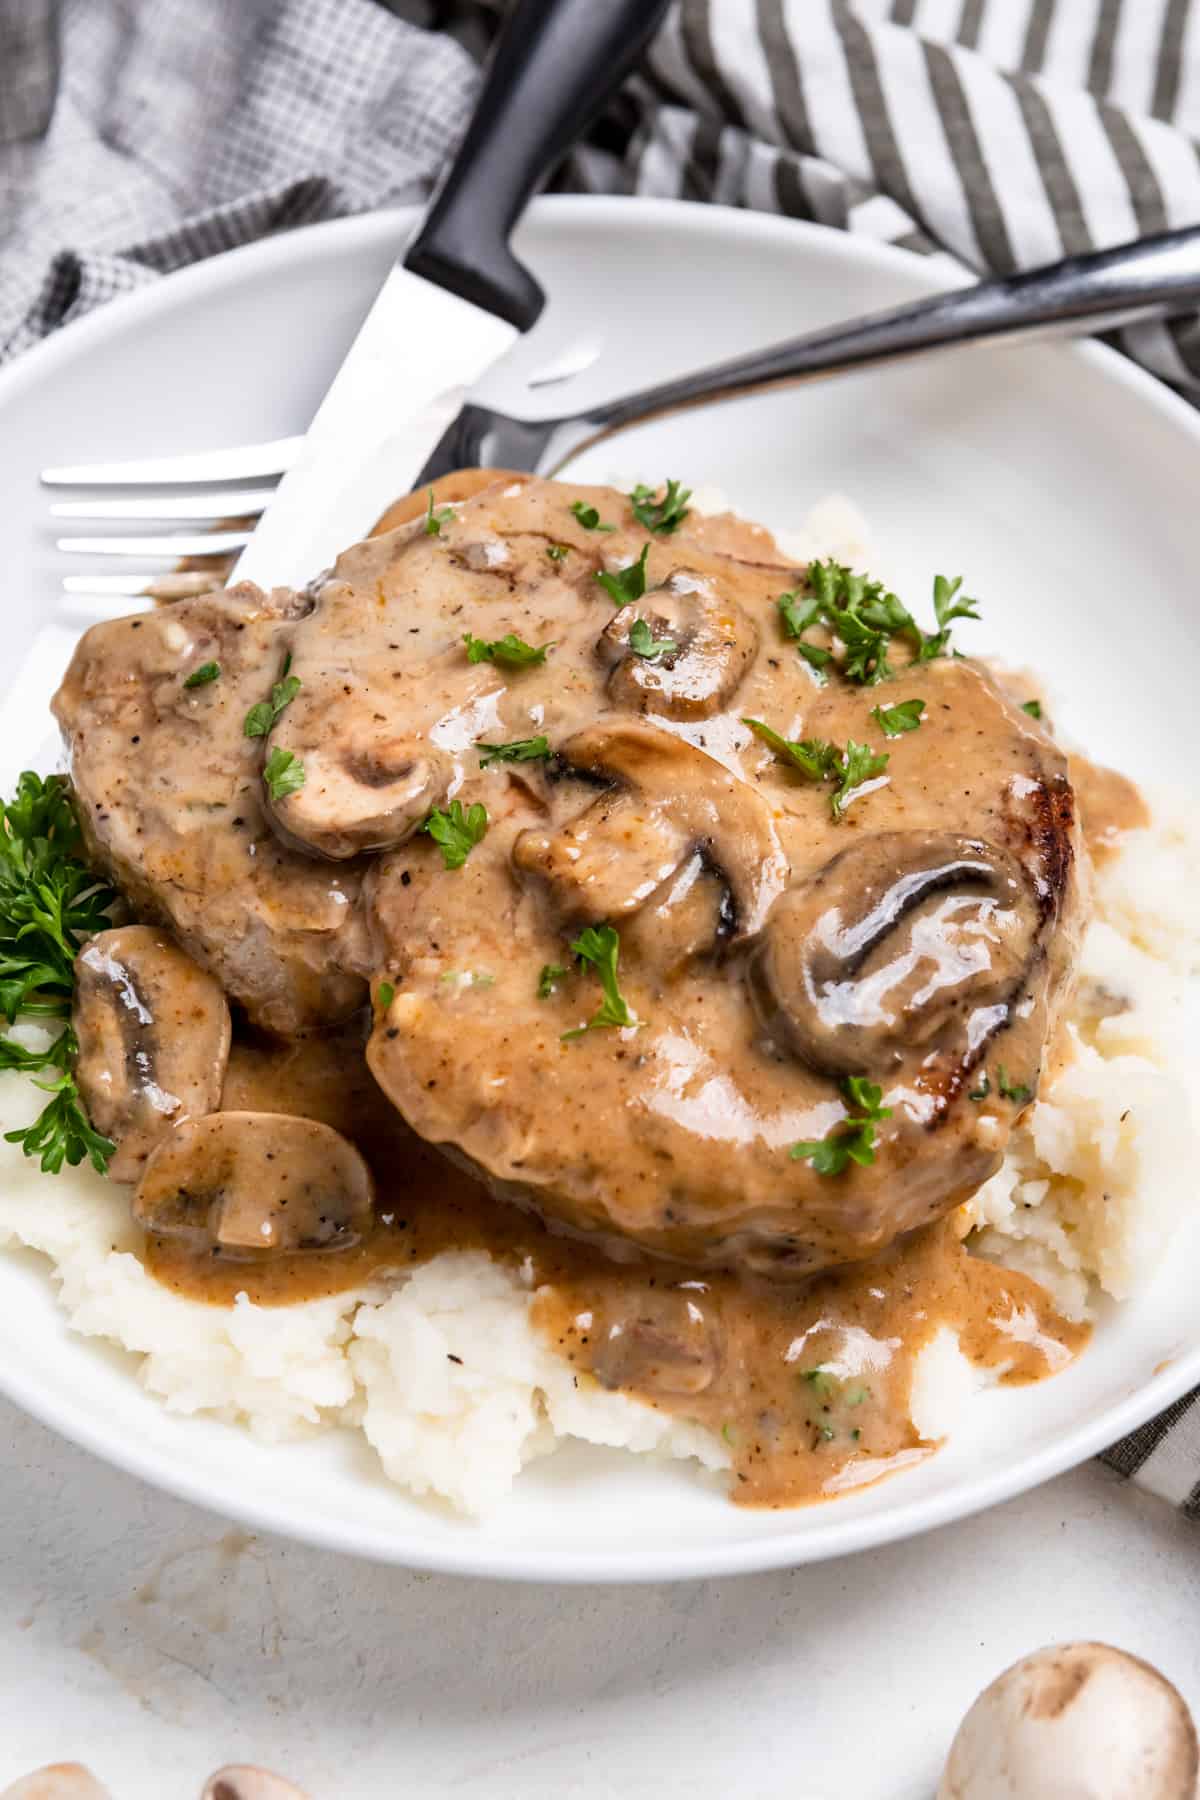 Cream of mushroom pork chop on mashed potatoes with fork and knife.